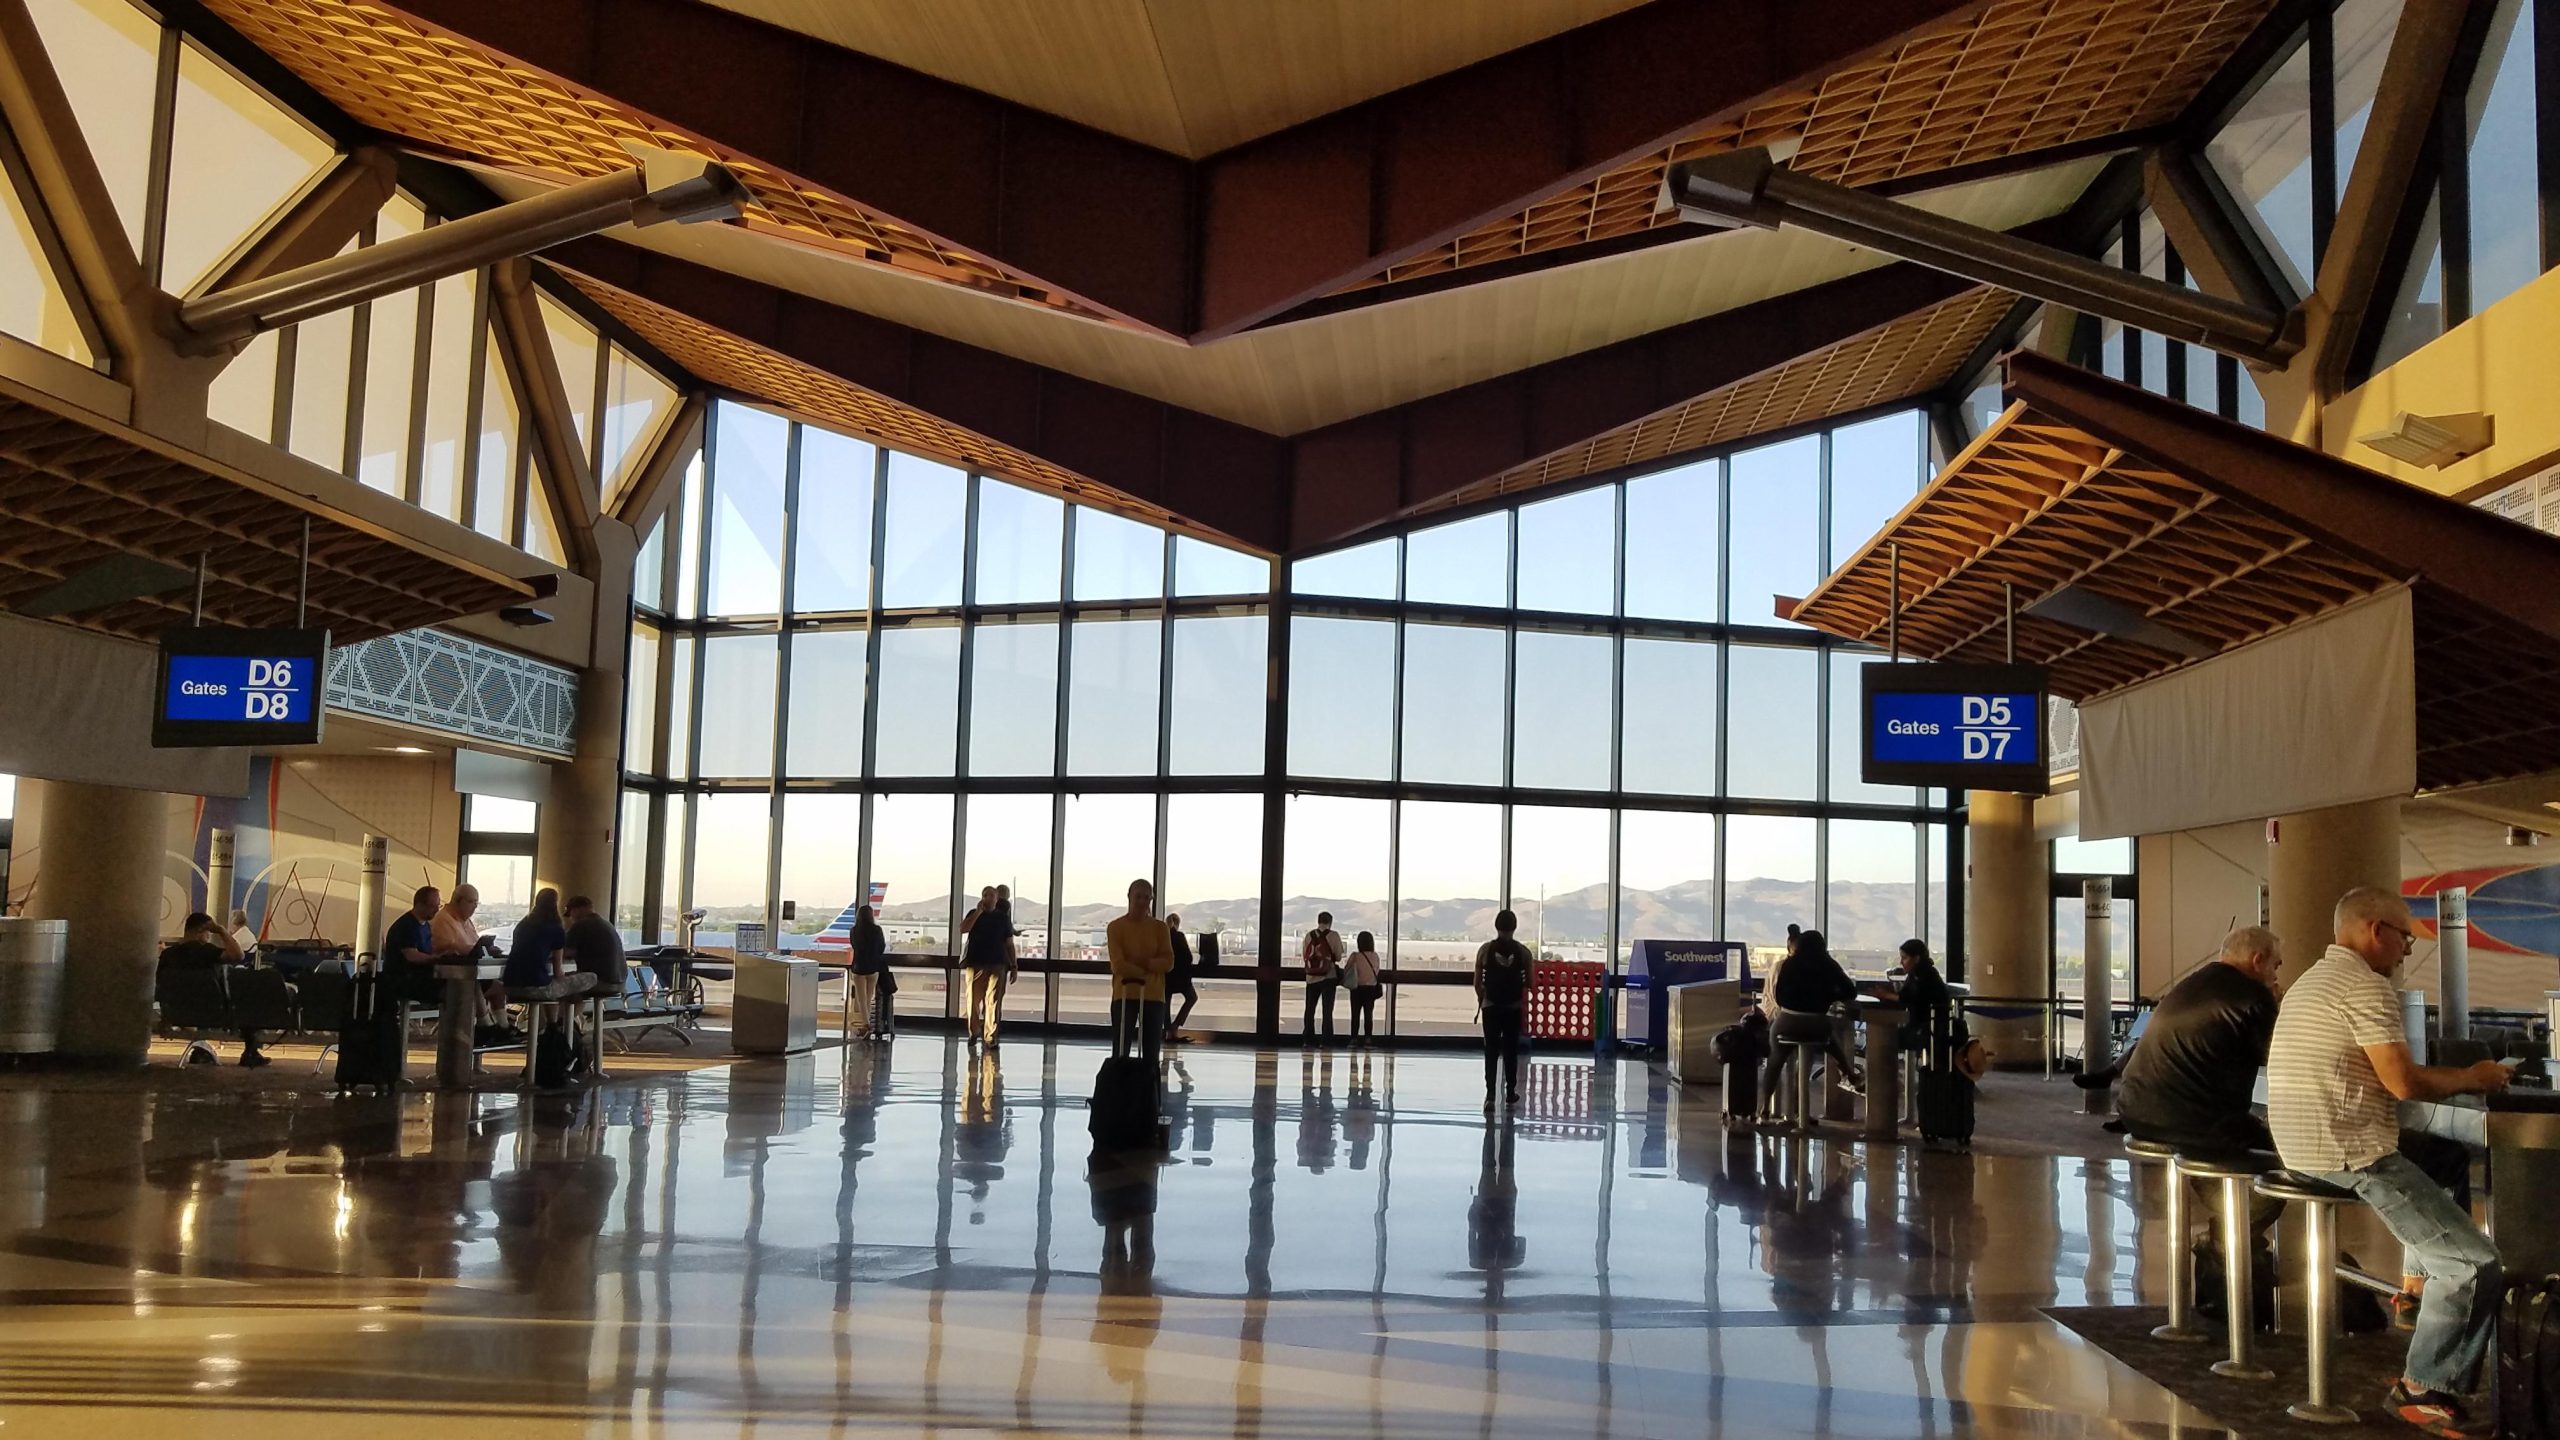 Phoenix Sky Harbor is first airport to use advanced passenger identification technology